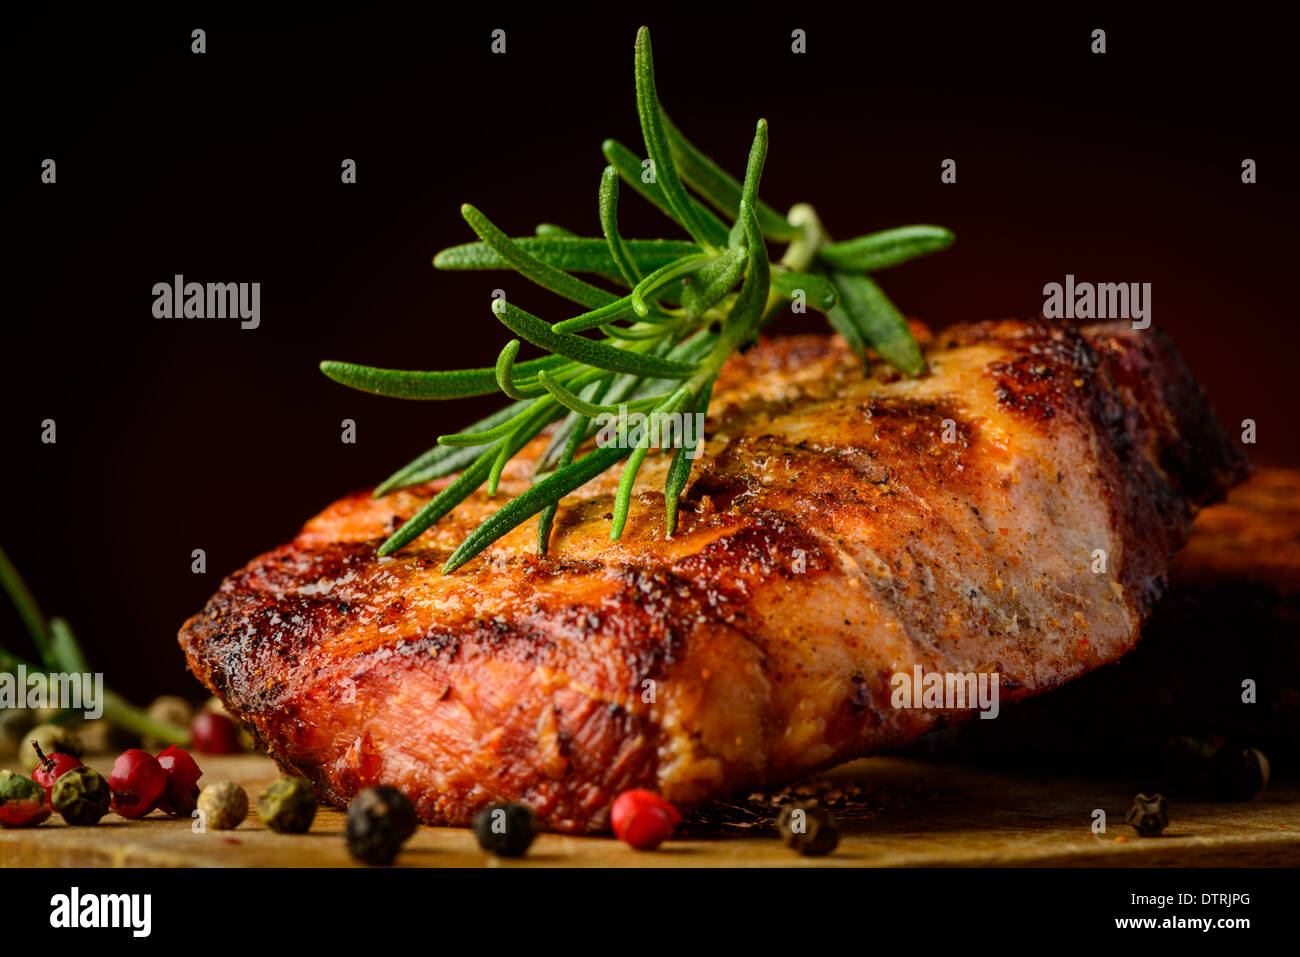 still life with grilled meat closeup detail and rosemary herb Stock Photo